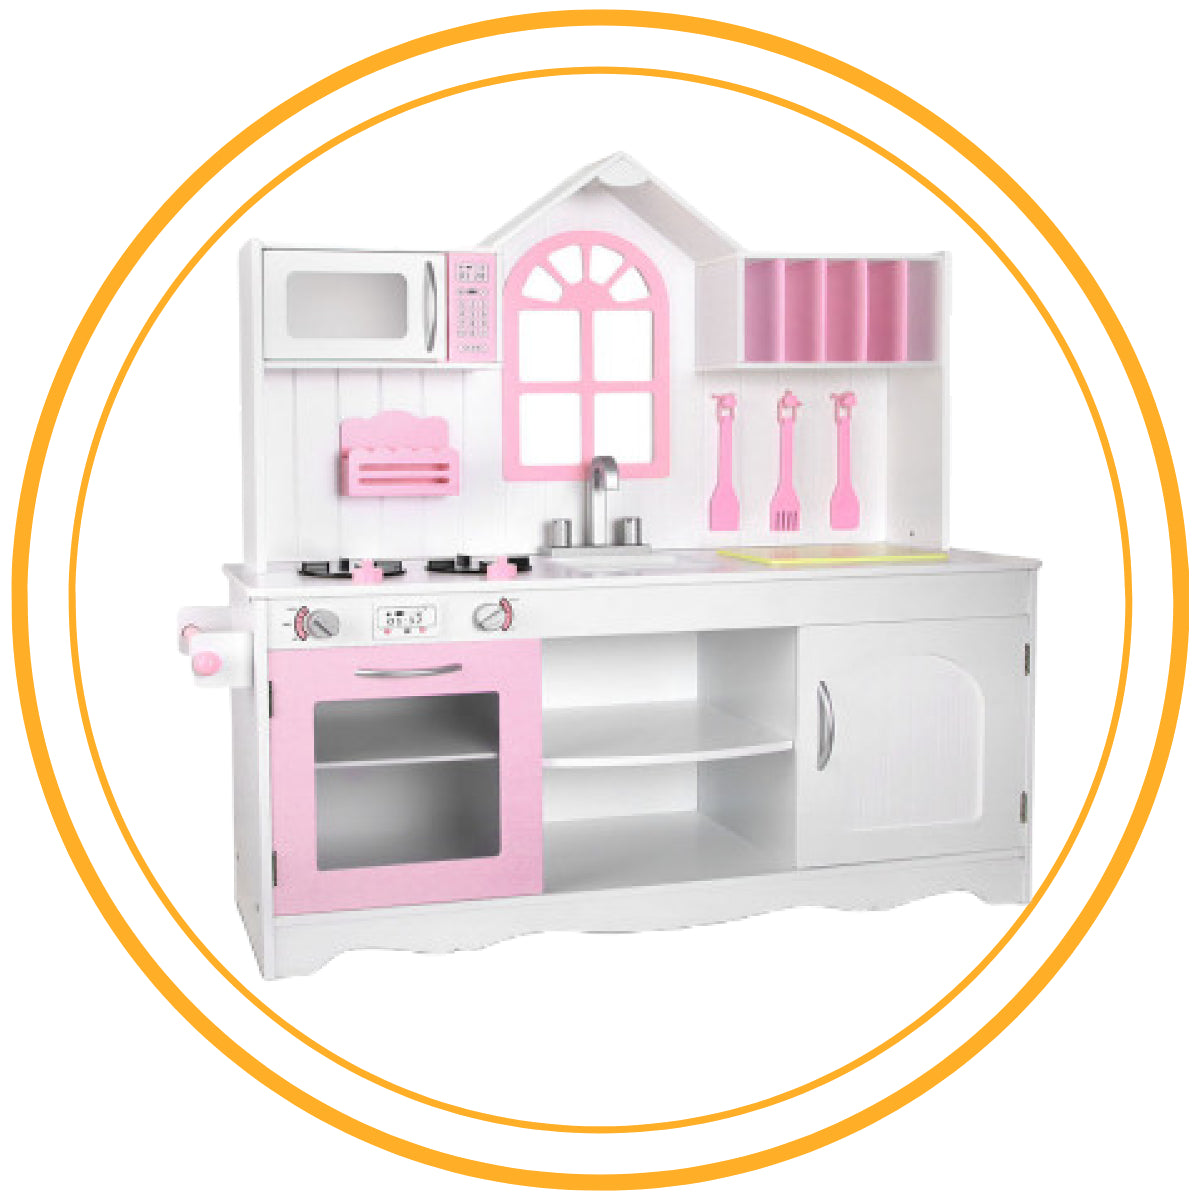 Toy Kitchens Collection